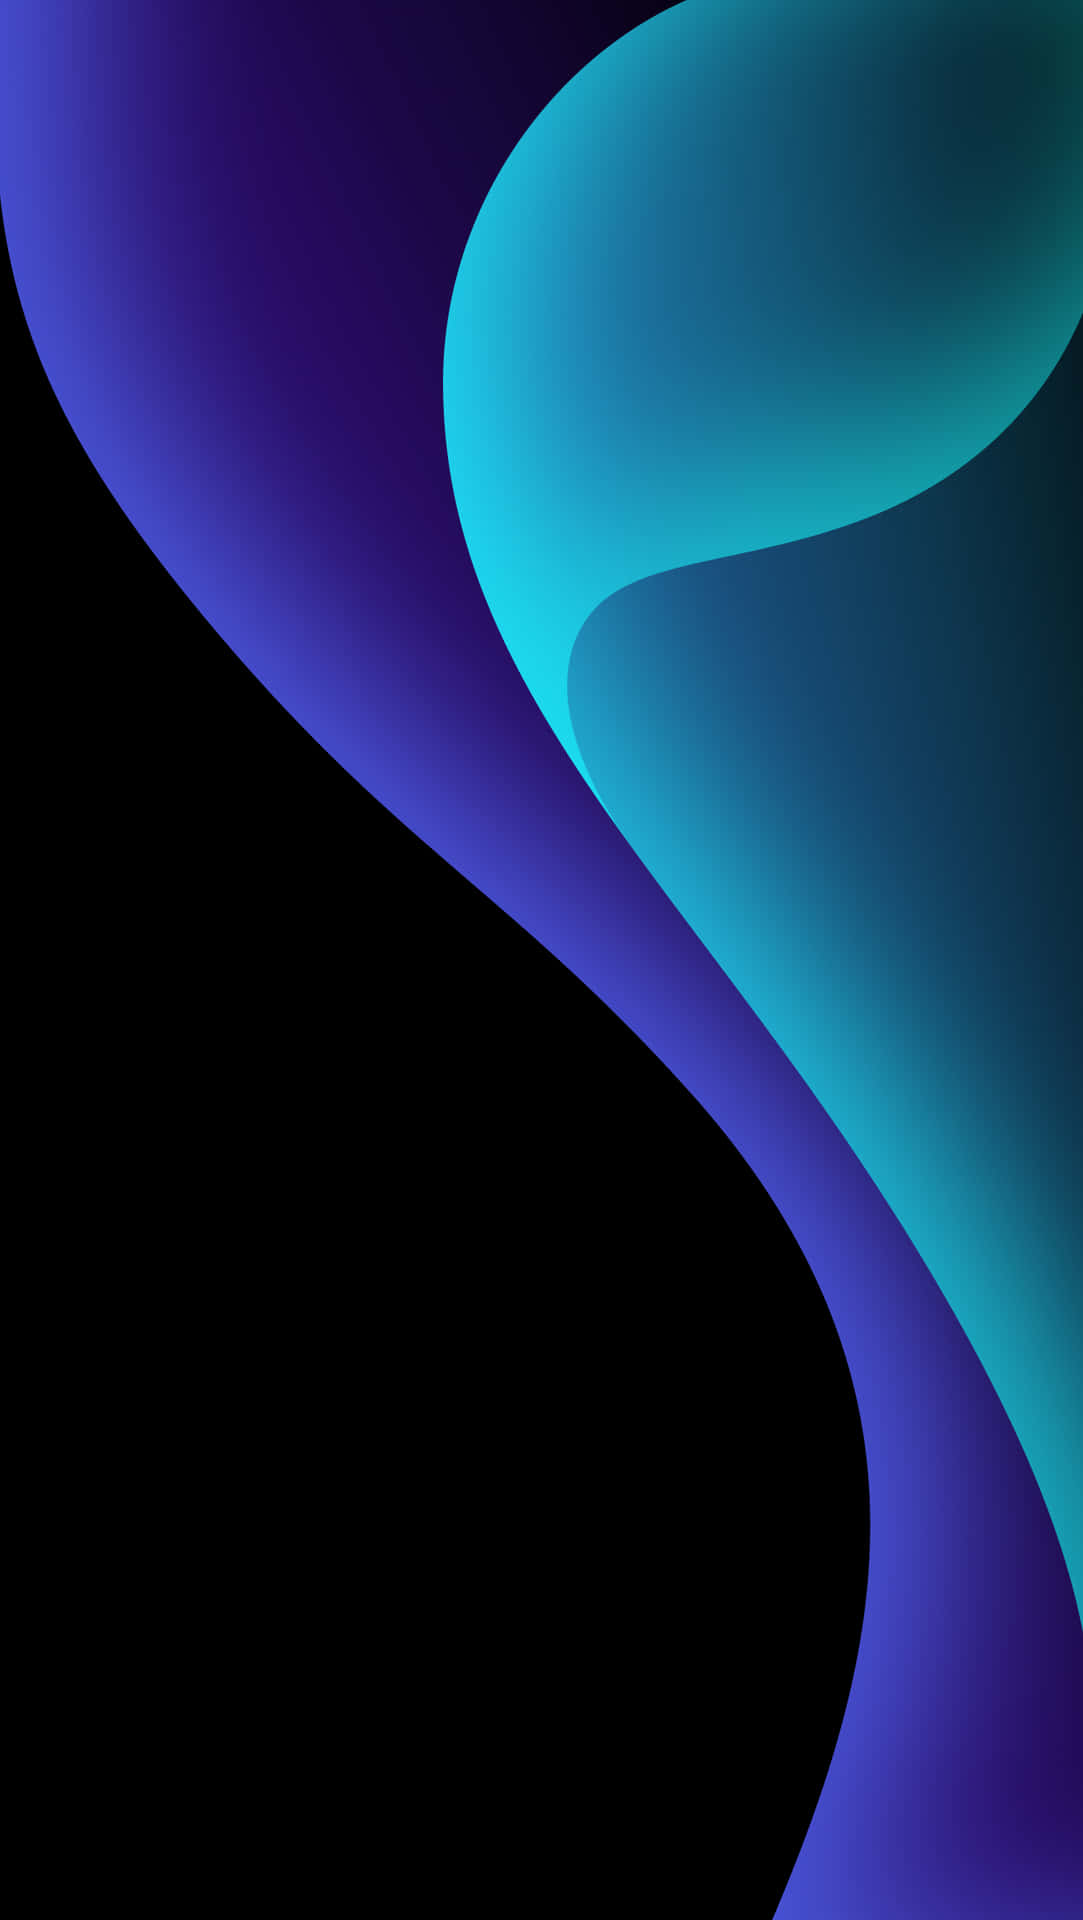 Enjoy the vibrant colors of this OLED display Wallpaper